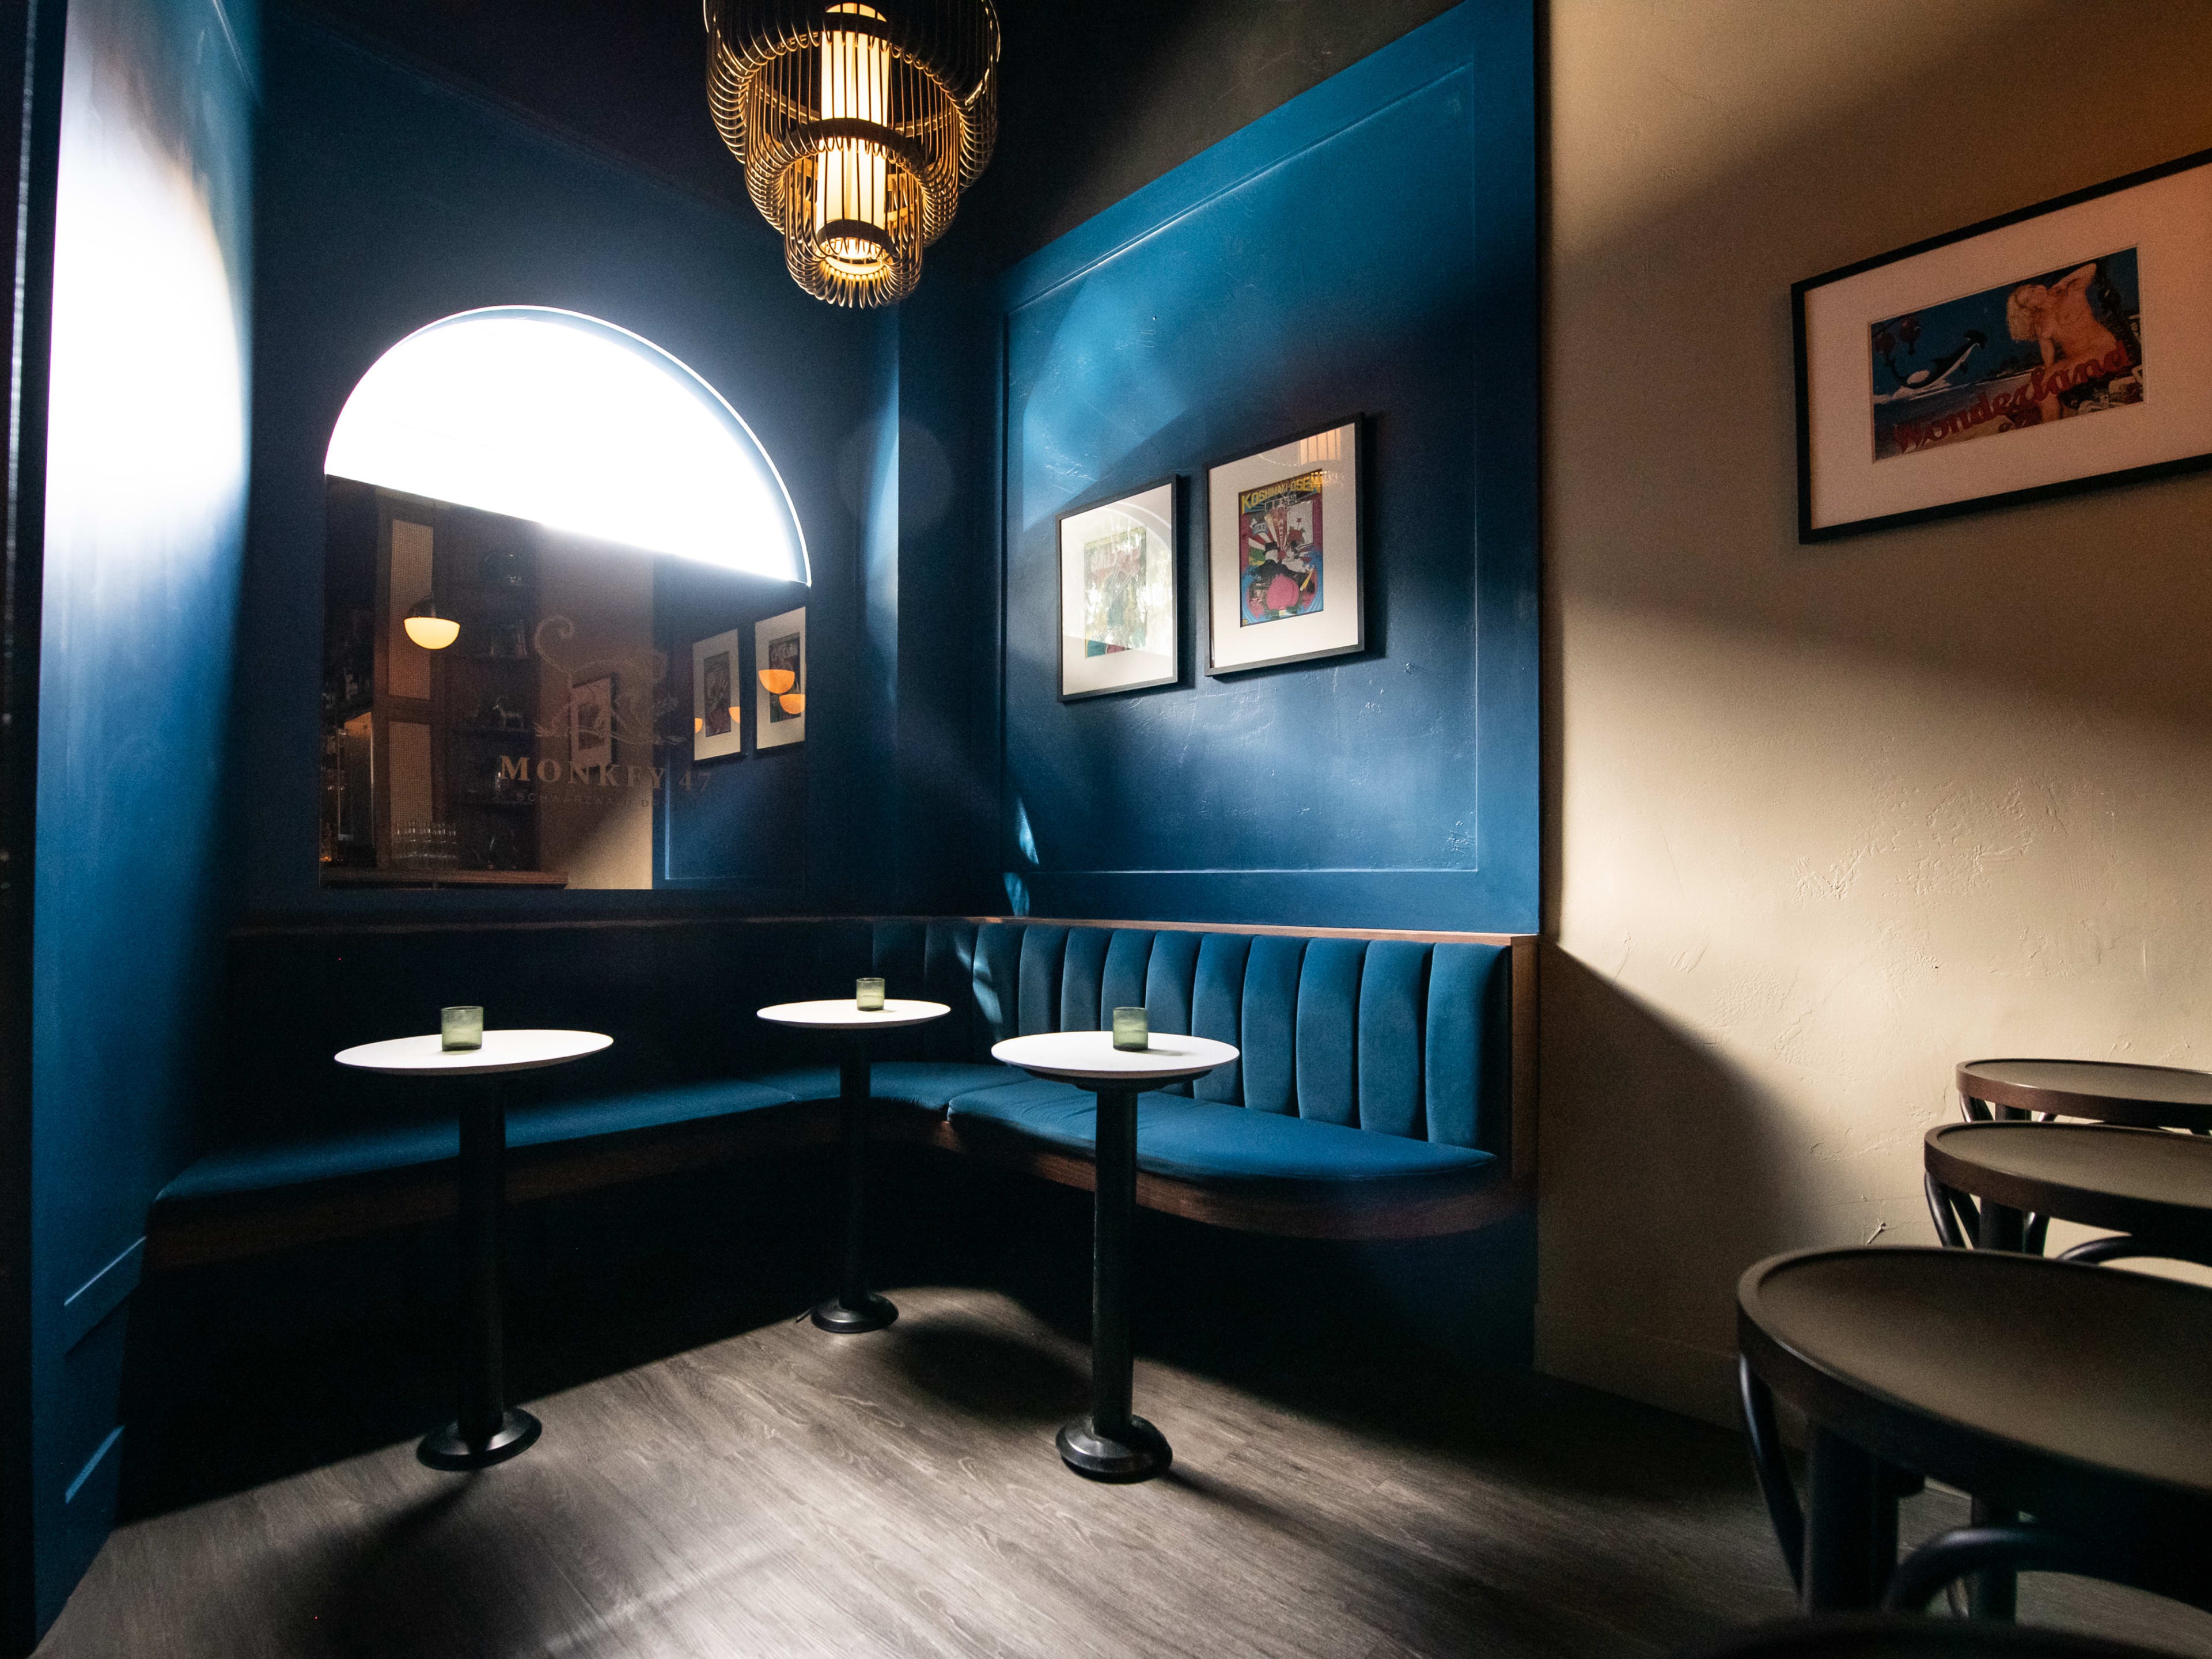 Corner of a bar with cerulean plush booths, small bistro tables, and a large mirror